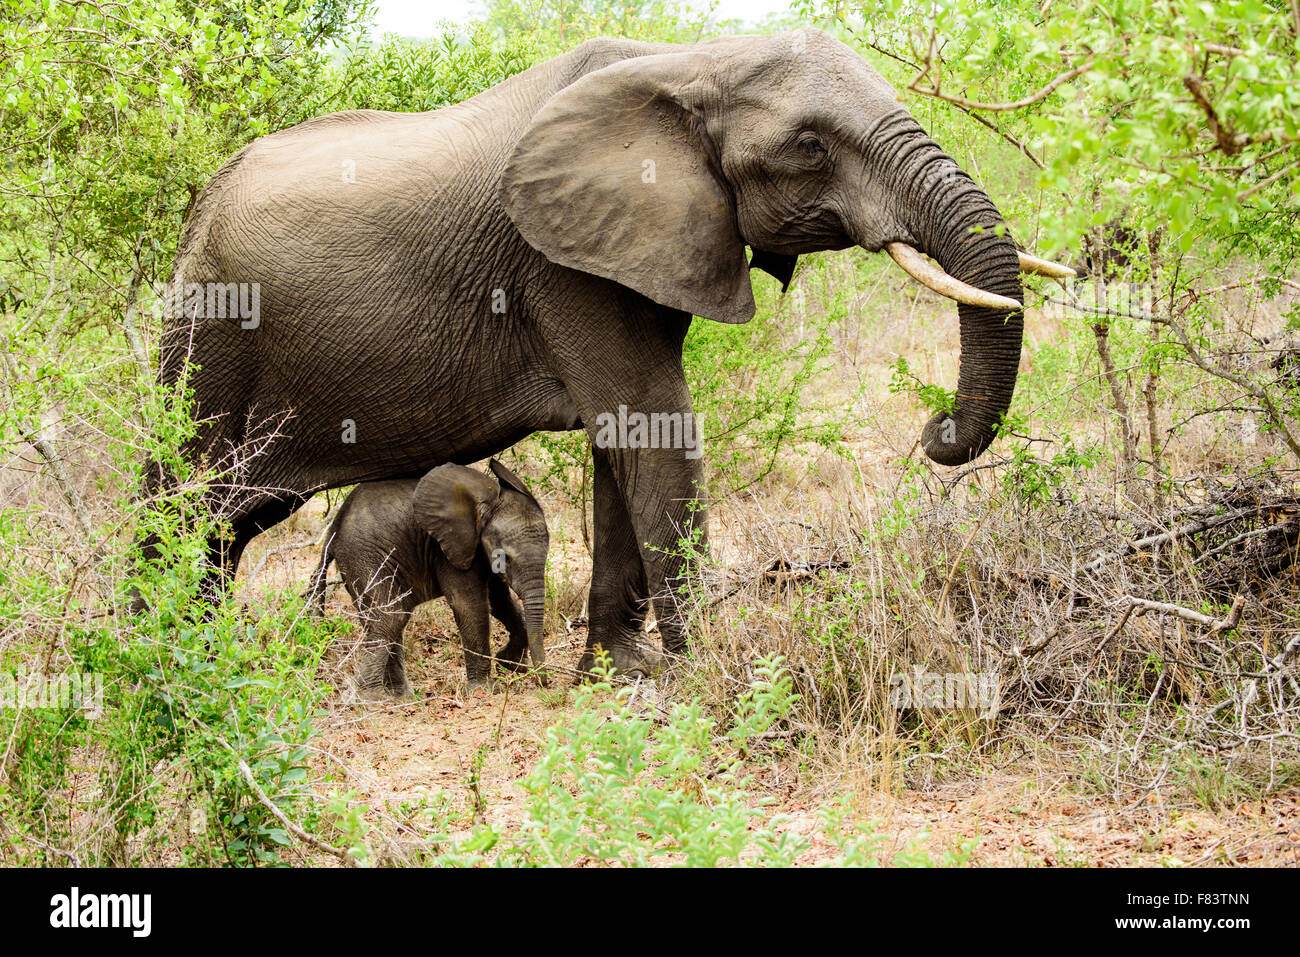 Baby elephant hiding under its mother's belly Stock Photo